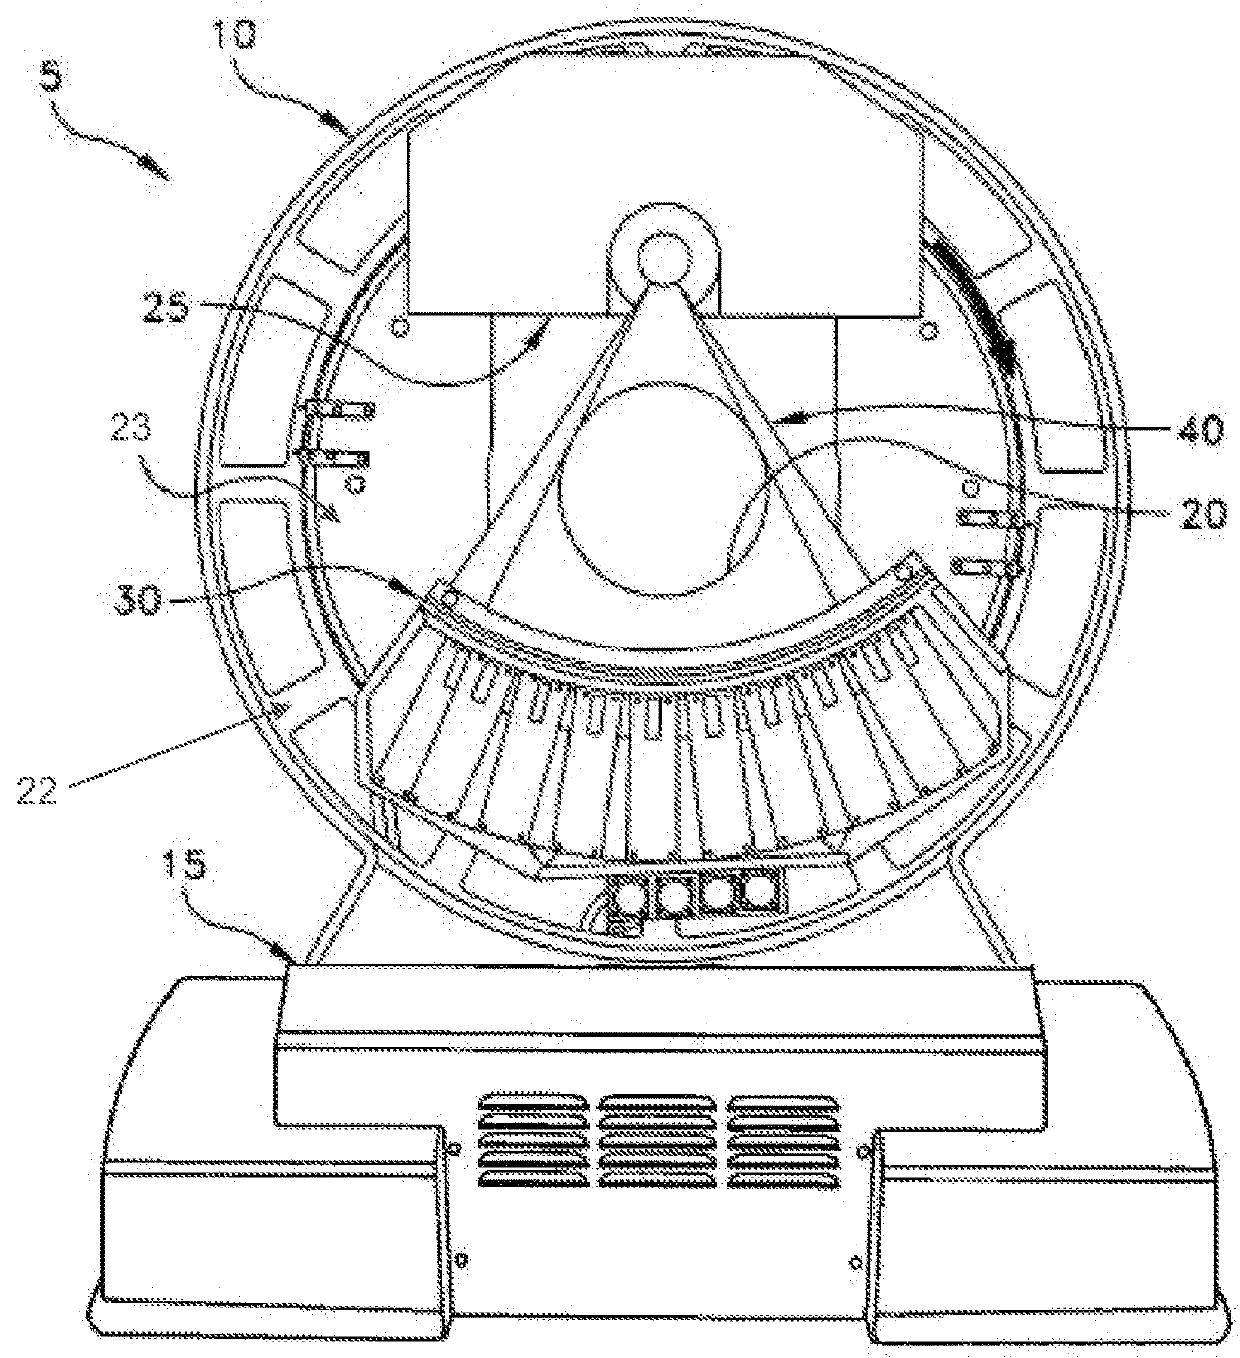 Anatomical imaging system having fixed gantry and rotating disc, with adjustable angle of tilt and increased structural integrity, and with improved power transmission and position sensing